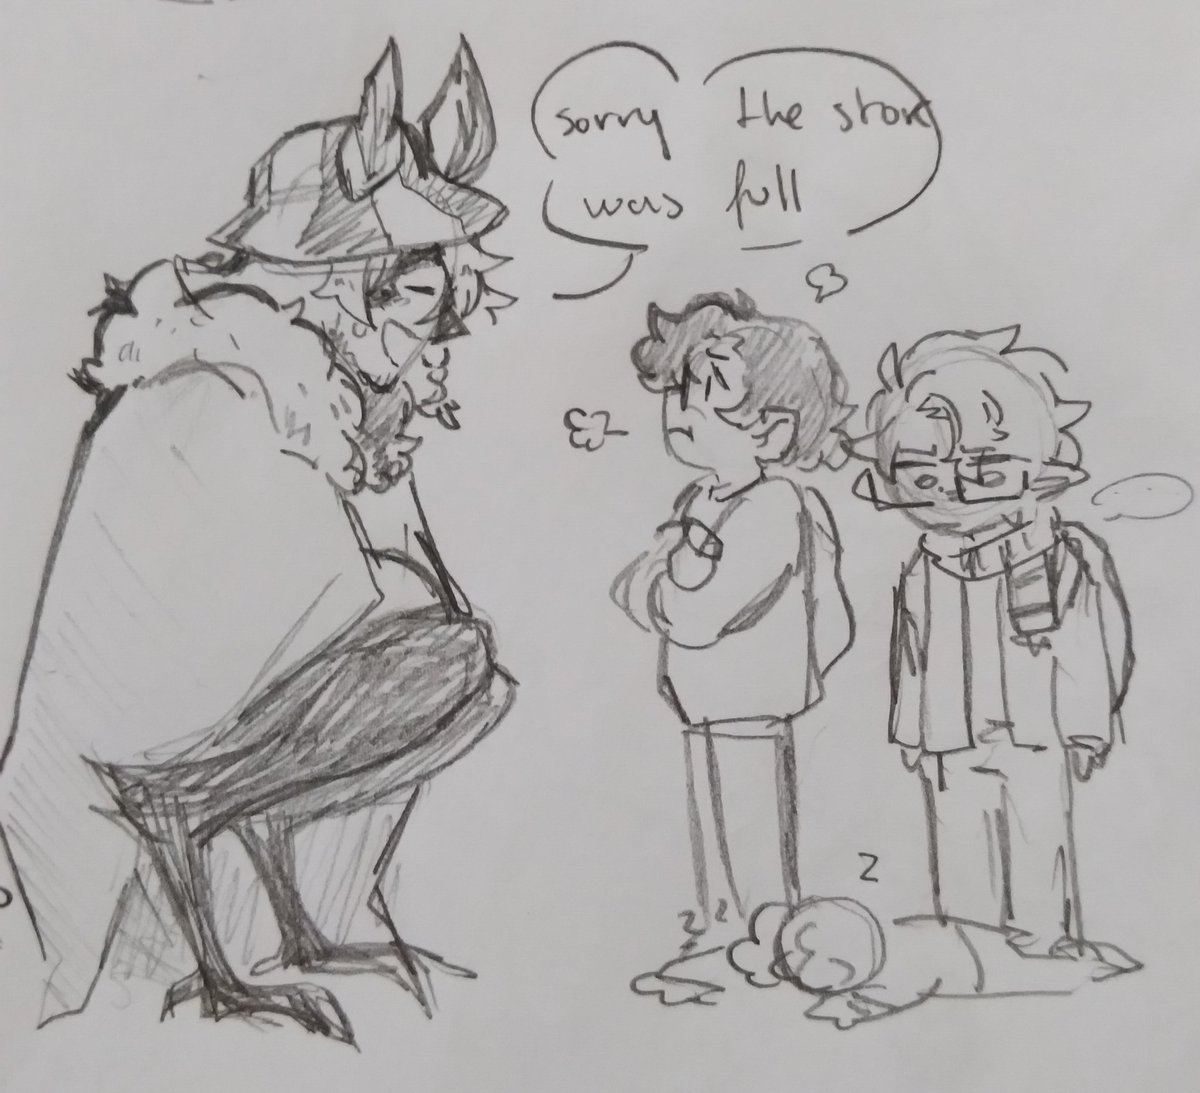 Cryptic Au
Mothza goes to school to pick up the kids 